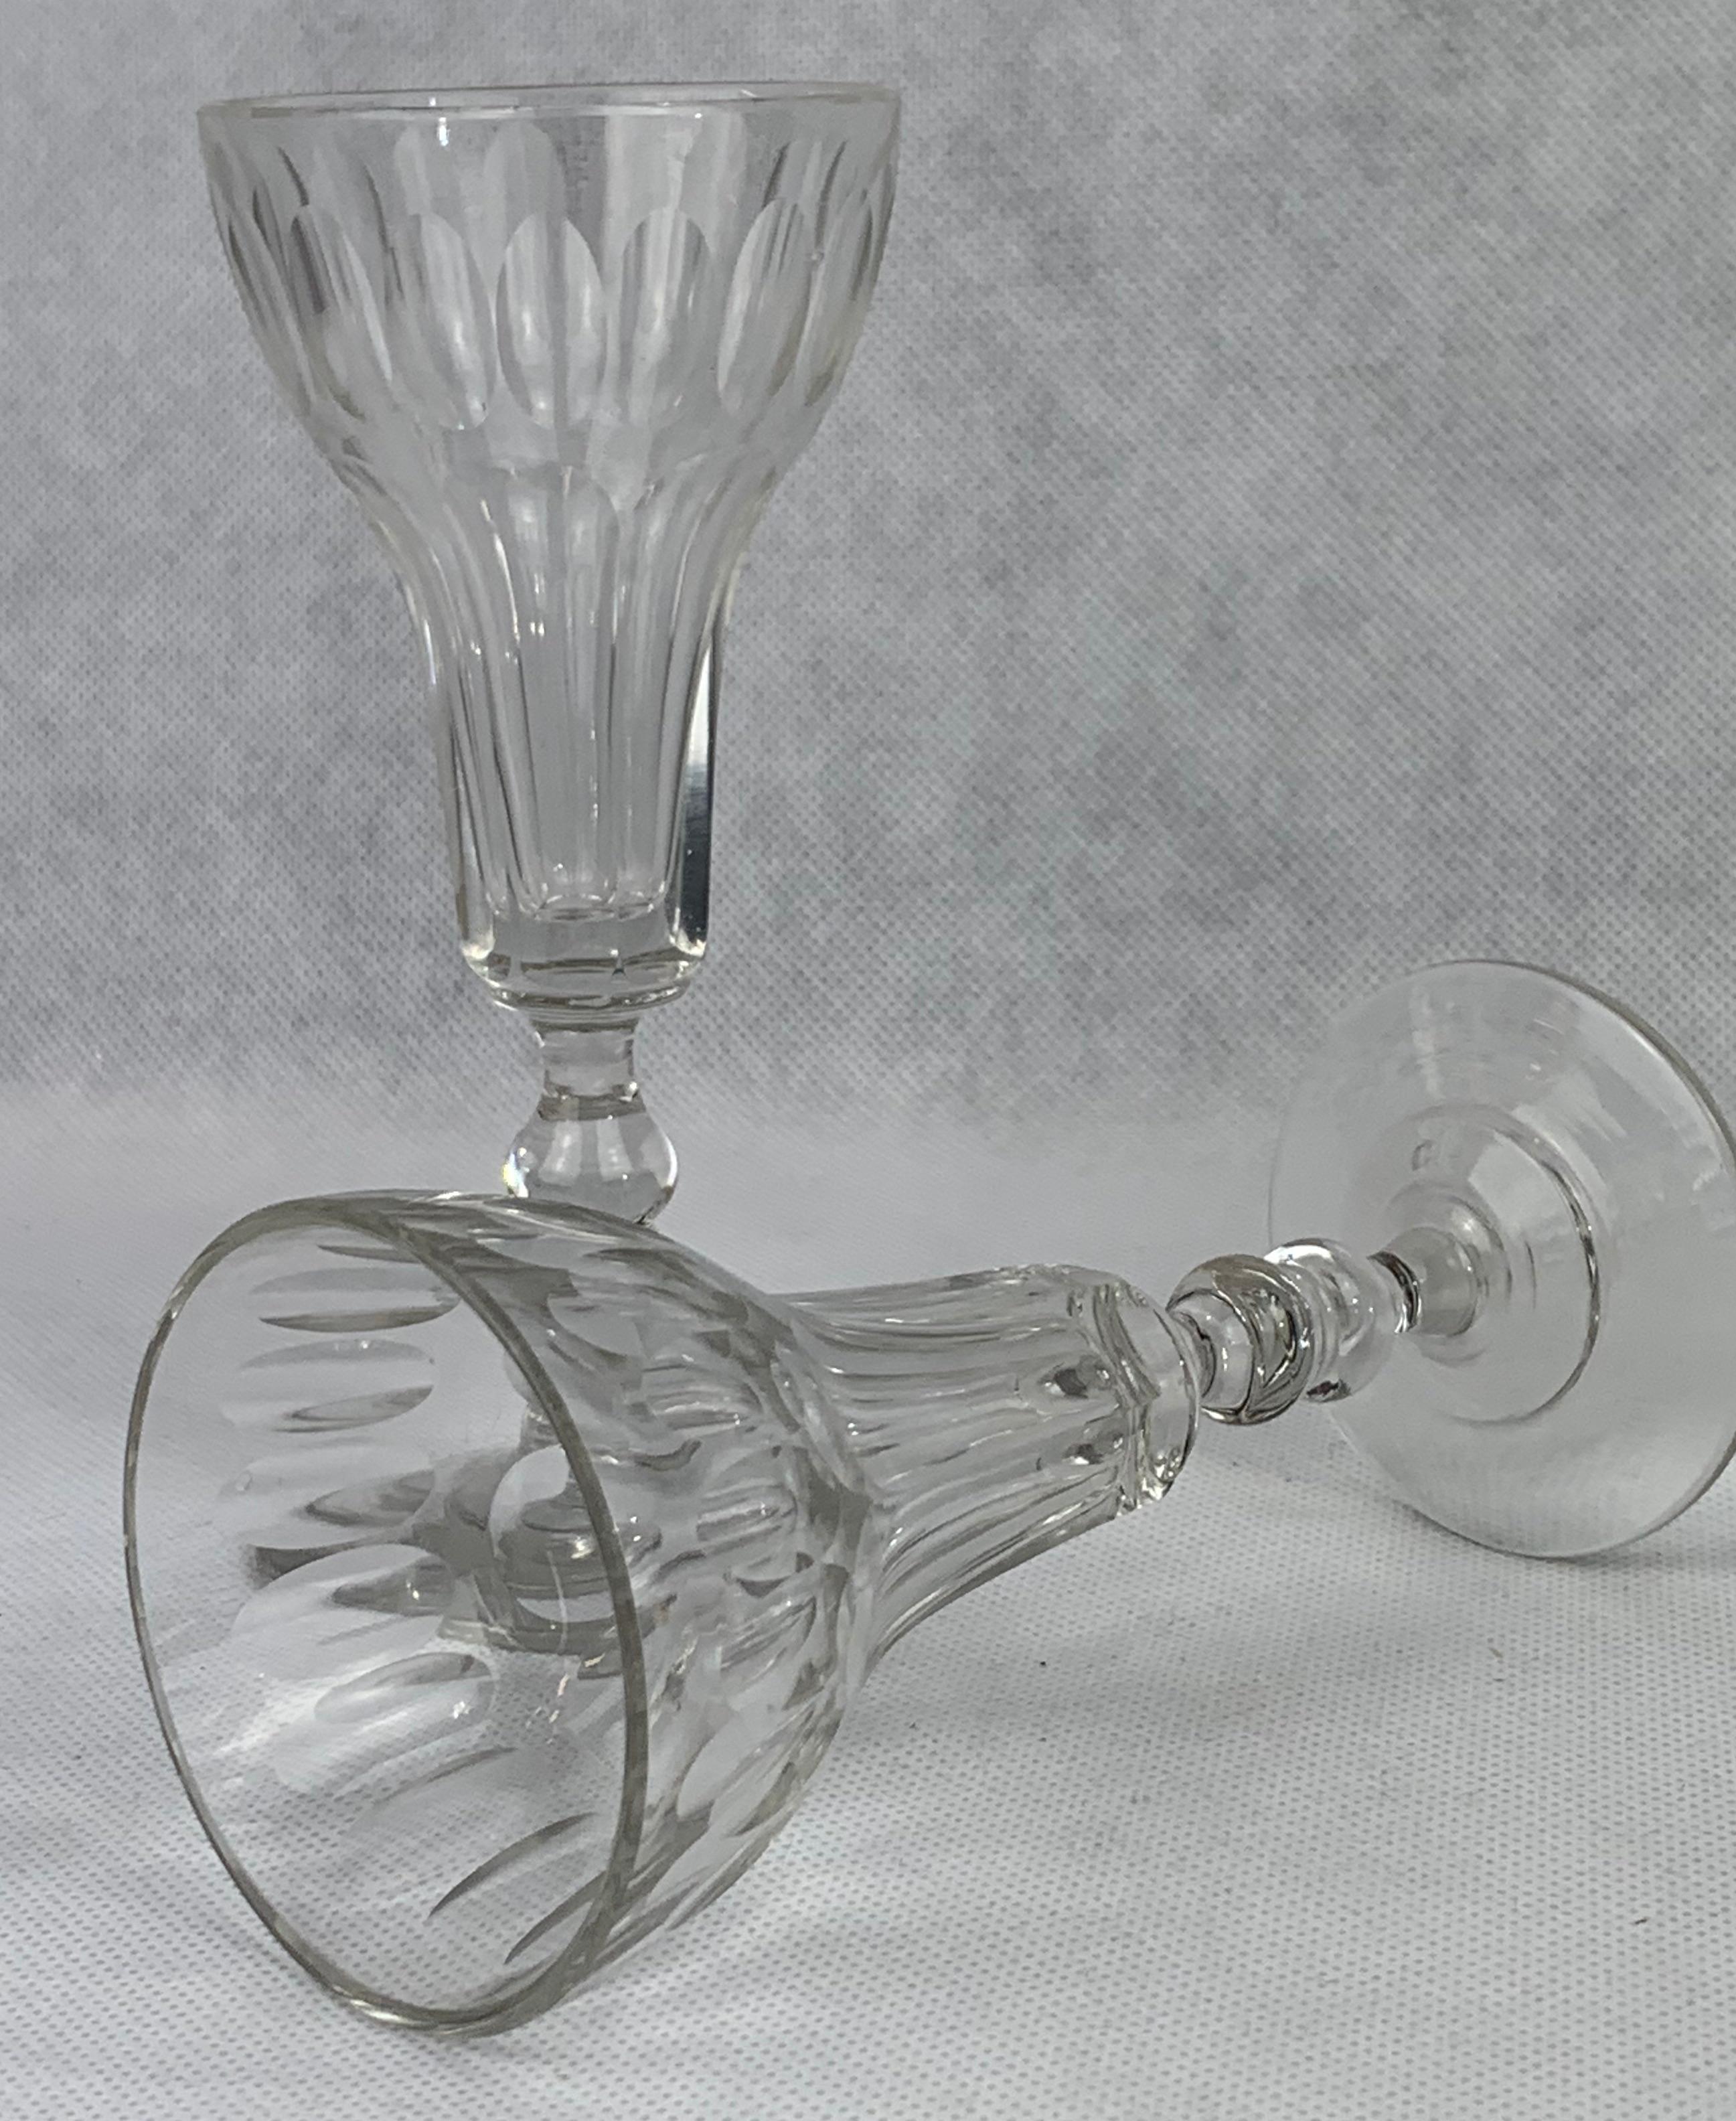 Pair of French cut crystal stemmed flutes.  The cutting style around the top is thumbprint while the body is slice cut.
This pair would service well as toasting glasses for a wedding.
H-6.5